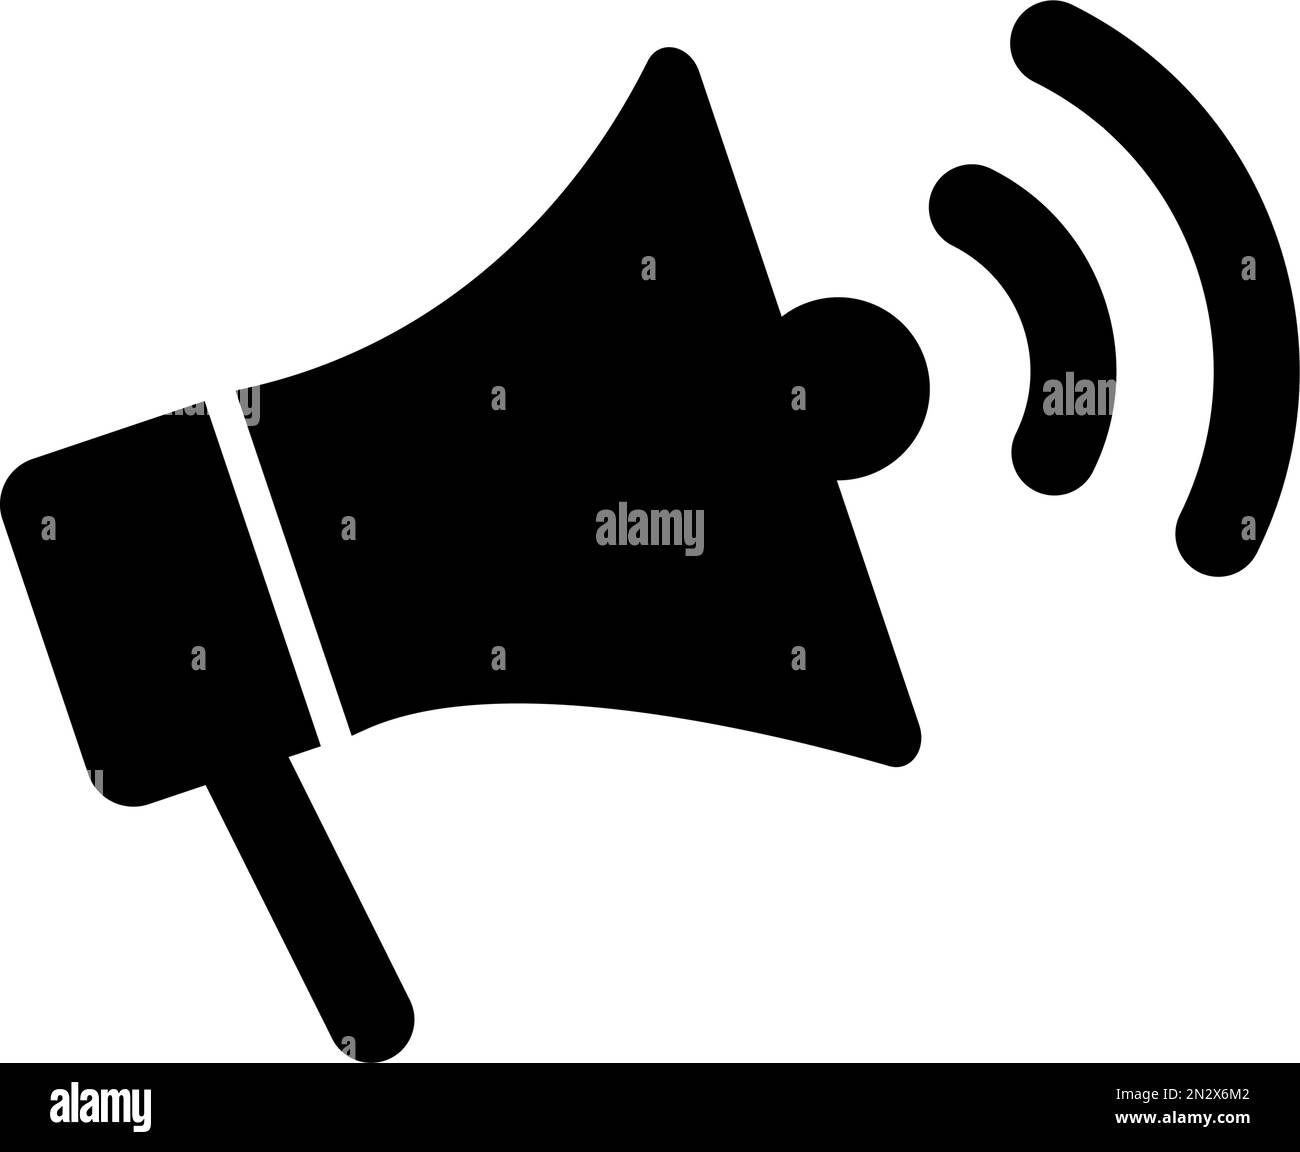 Megaphone and sound waves silhouette icon. Editable vector. Stock Vector